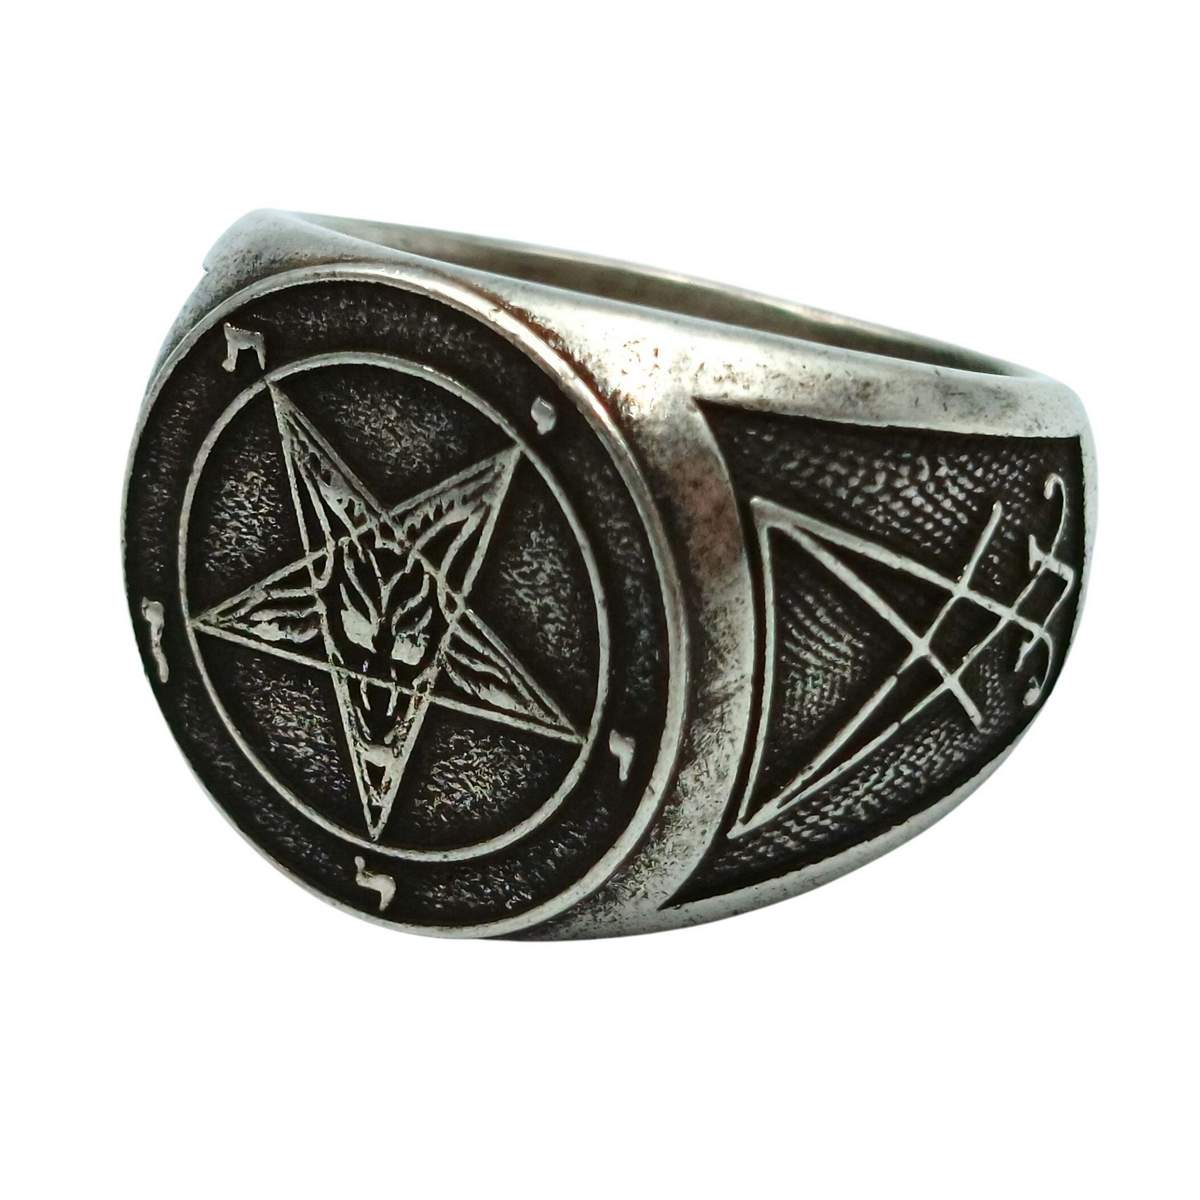 Baphomet sigil ring from bronze 6 US Silver plating 